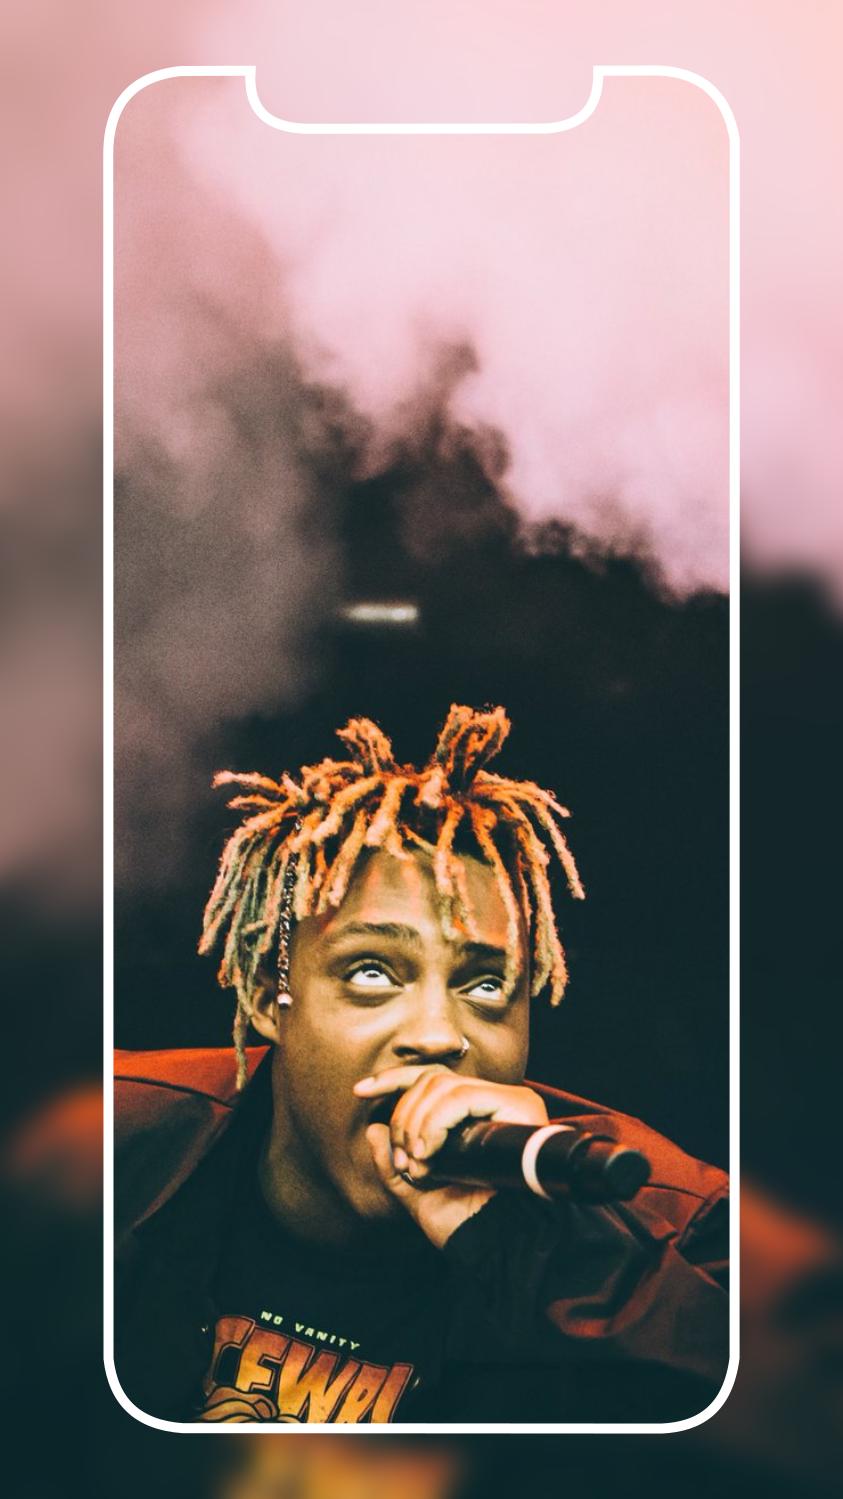 Juice WRLD Wallpaper 4K for Android